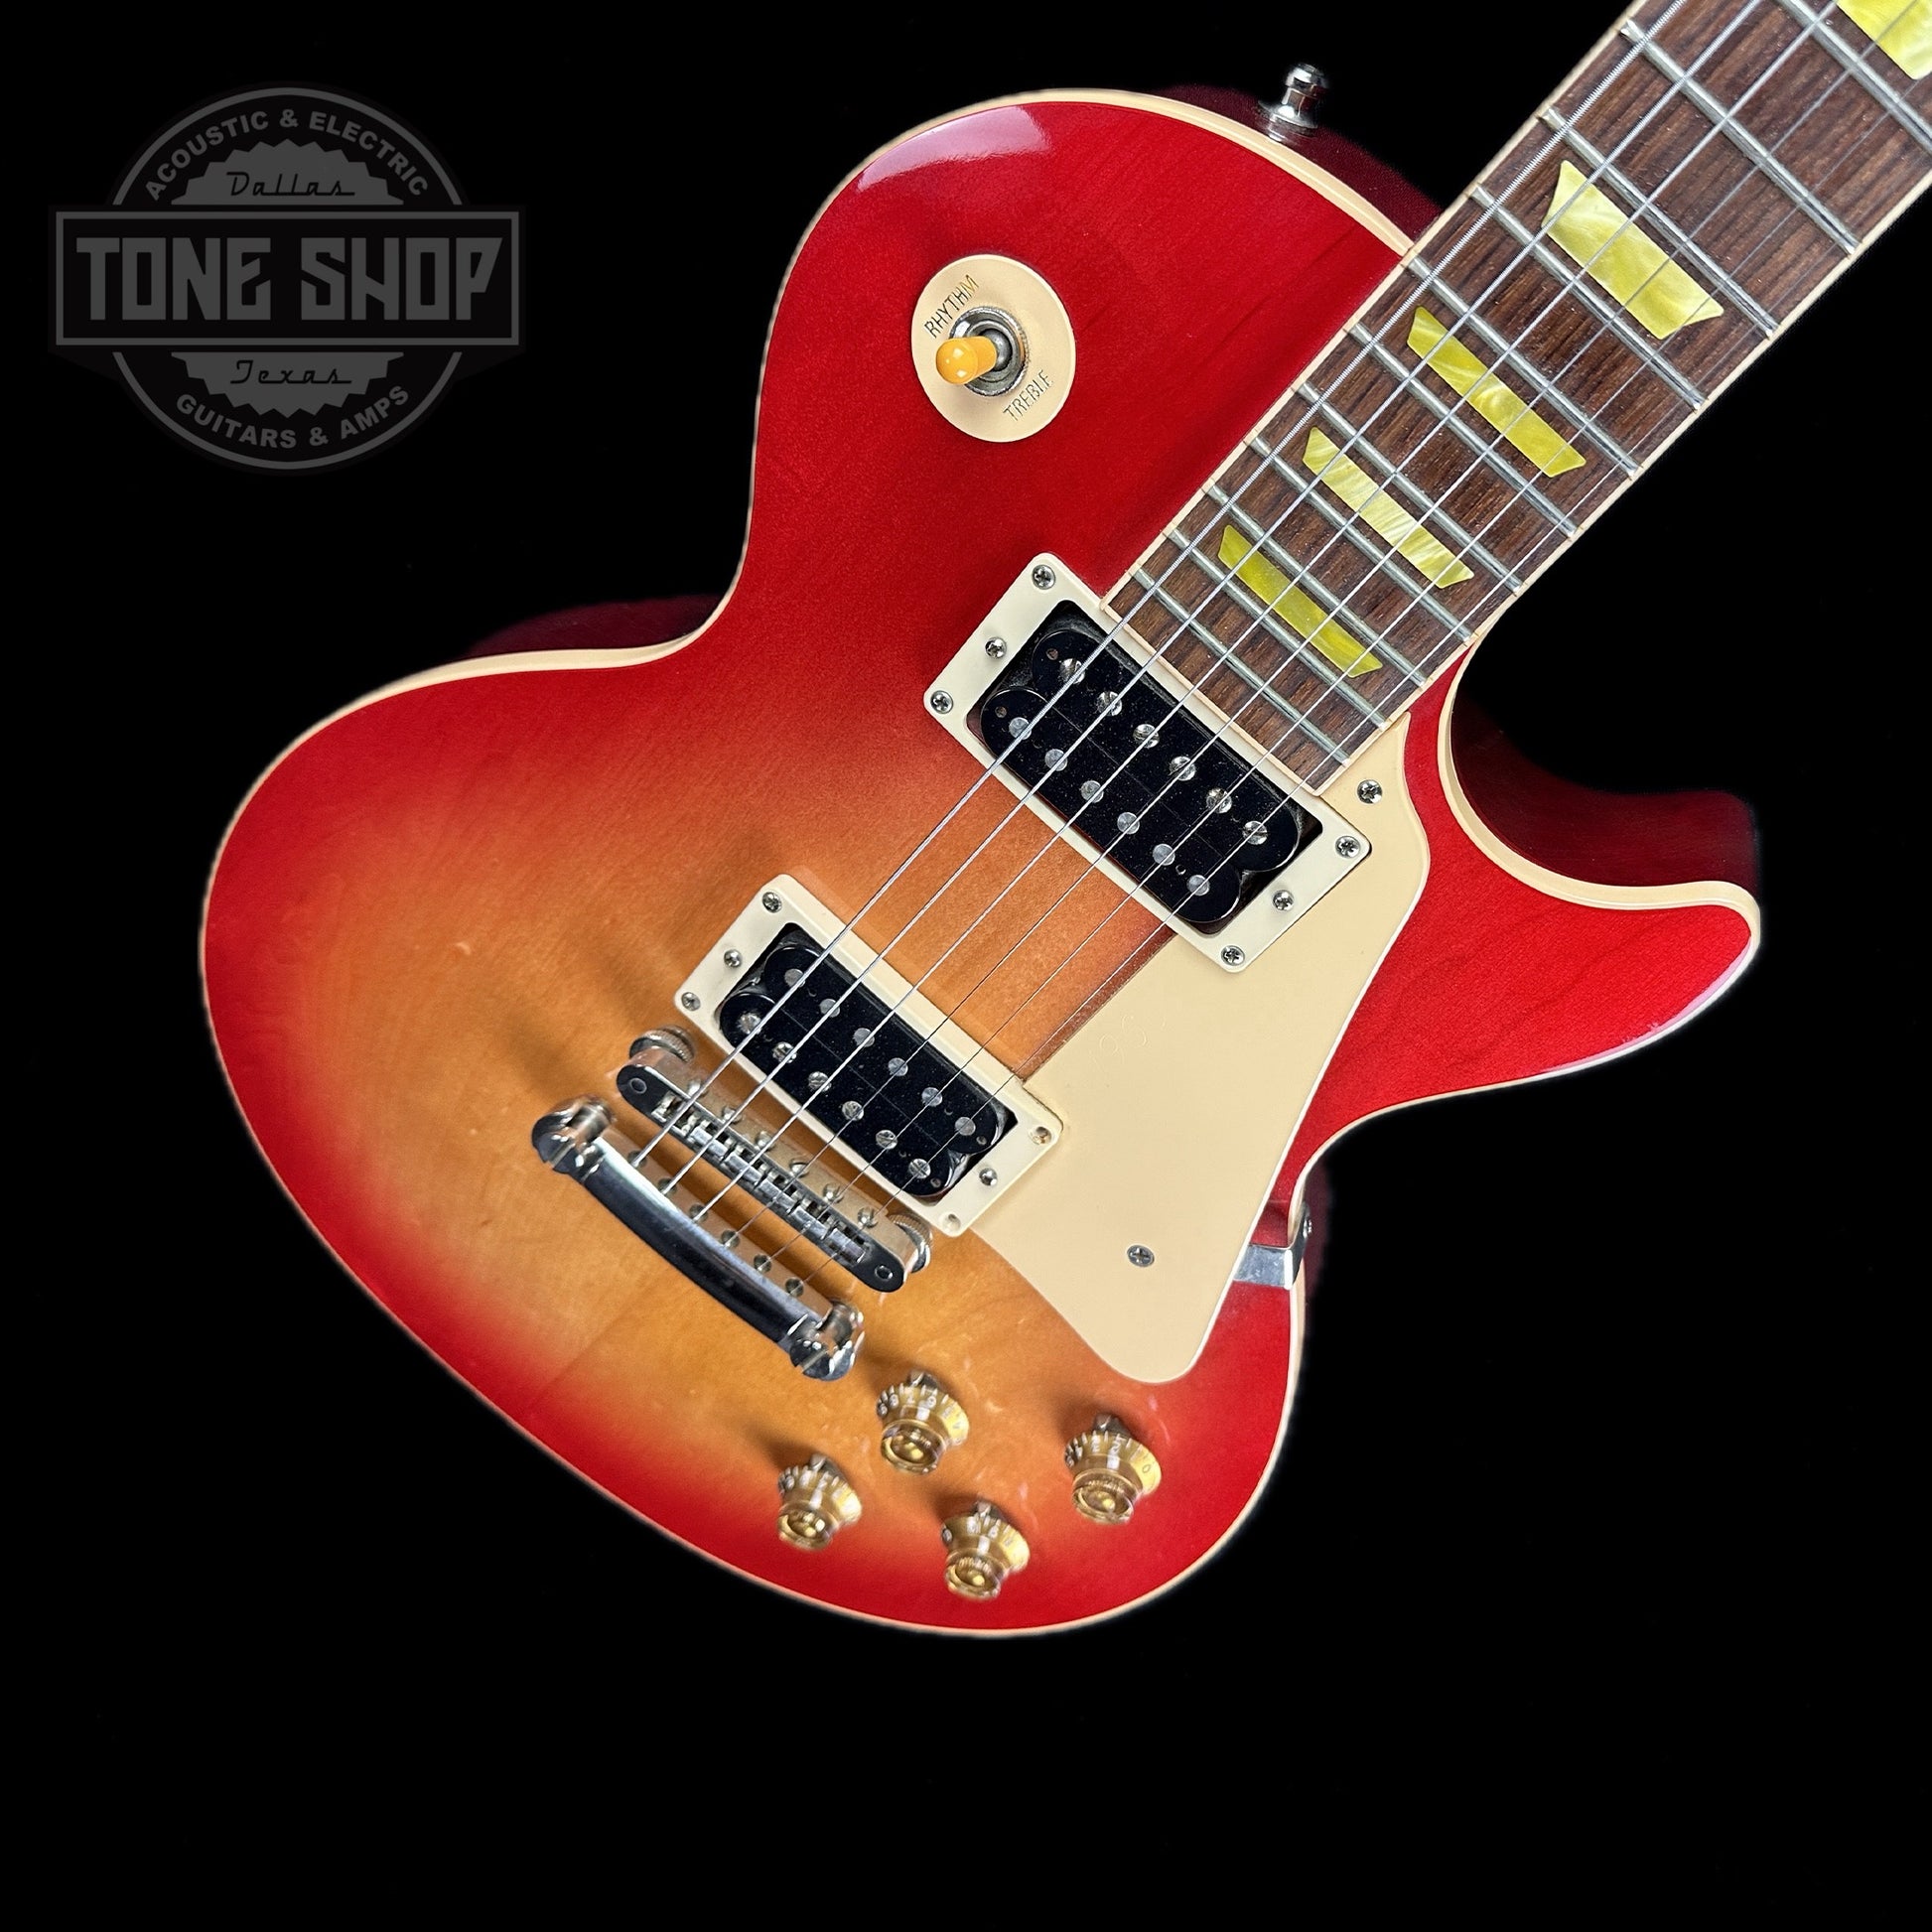 Front angle of Used Gibson Les Paul Classic Cherry Burst.